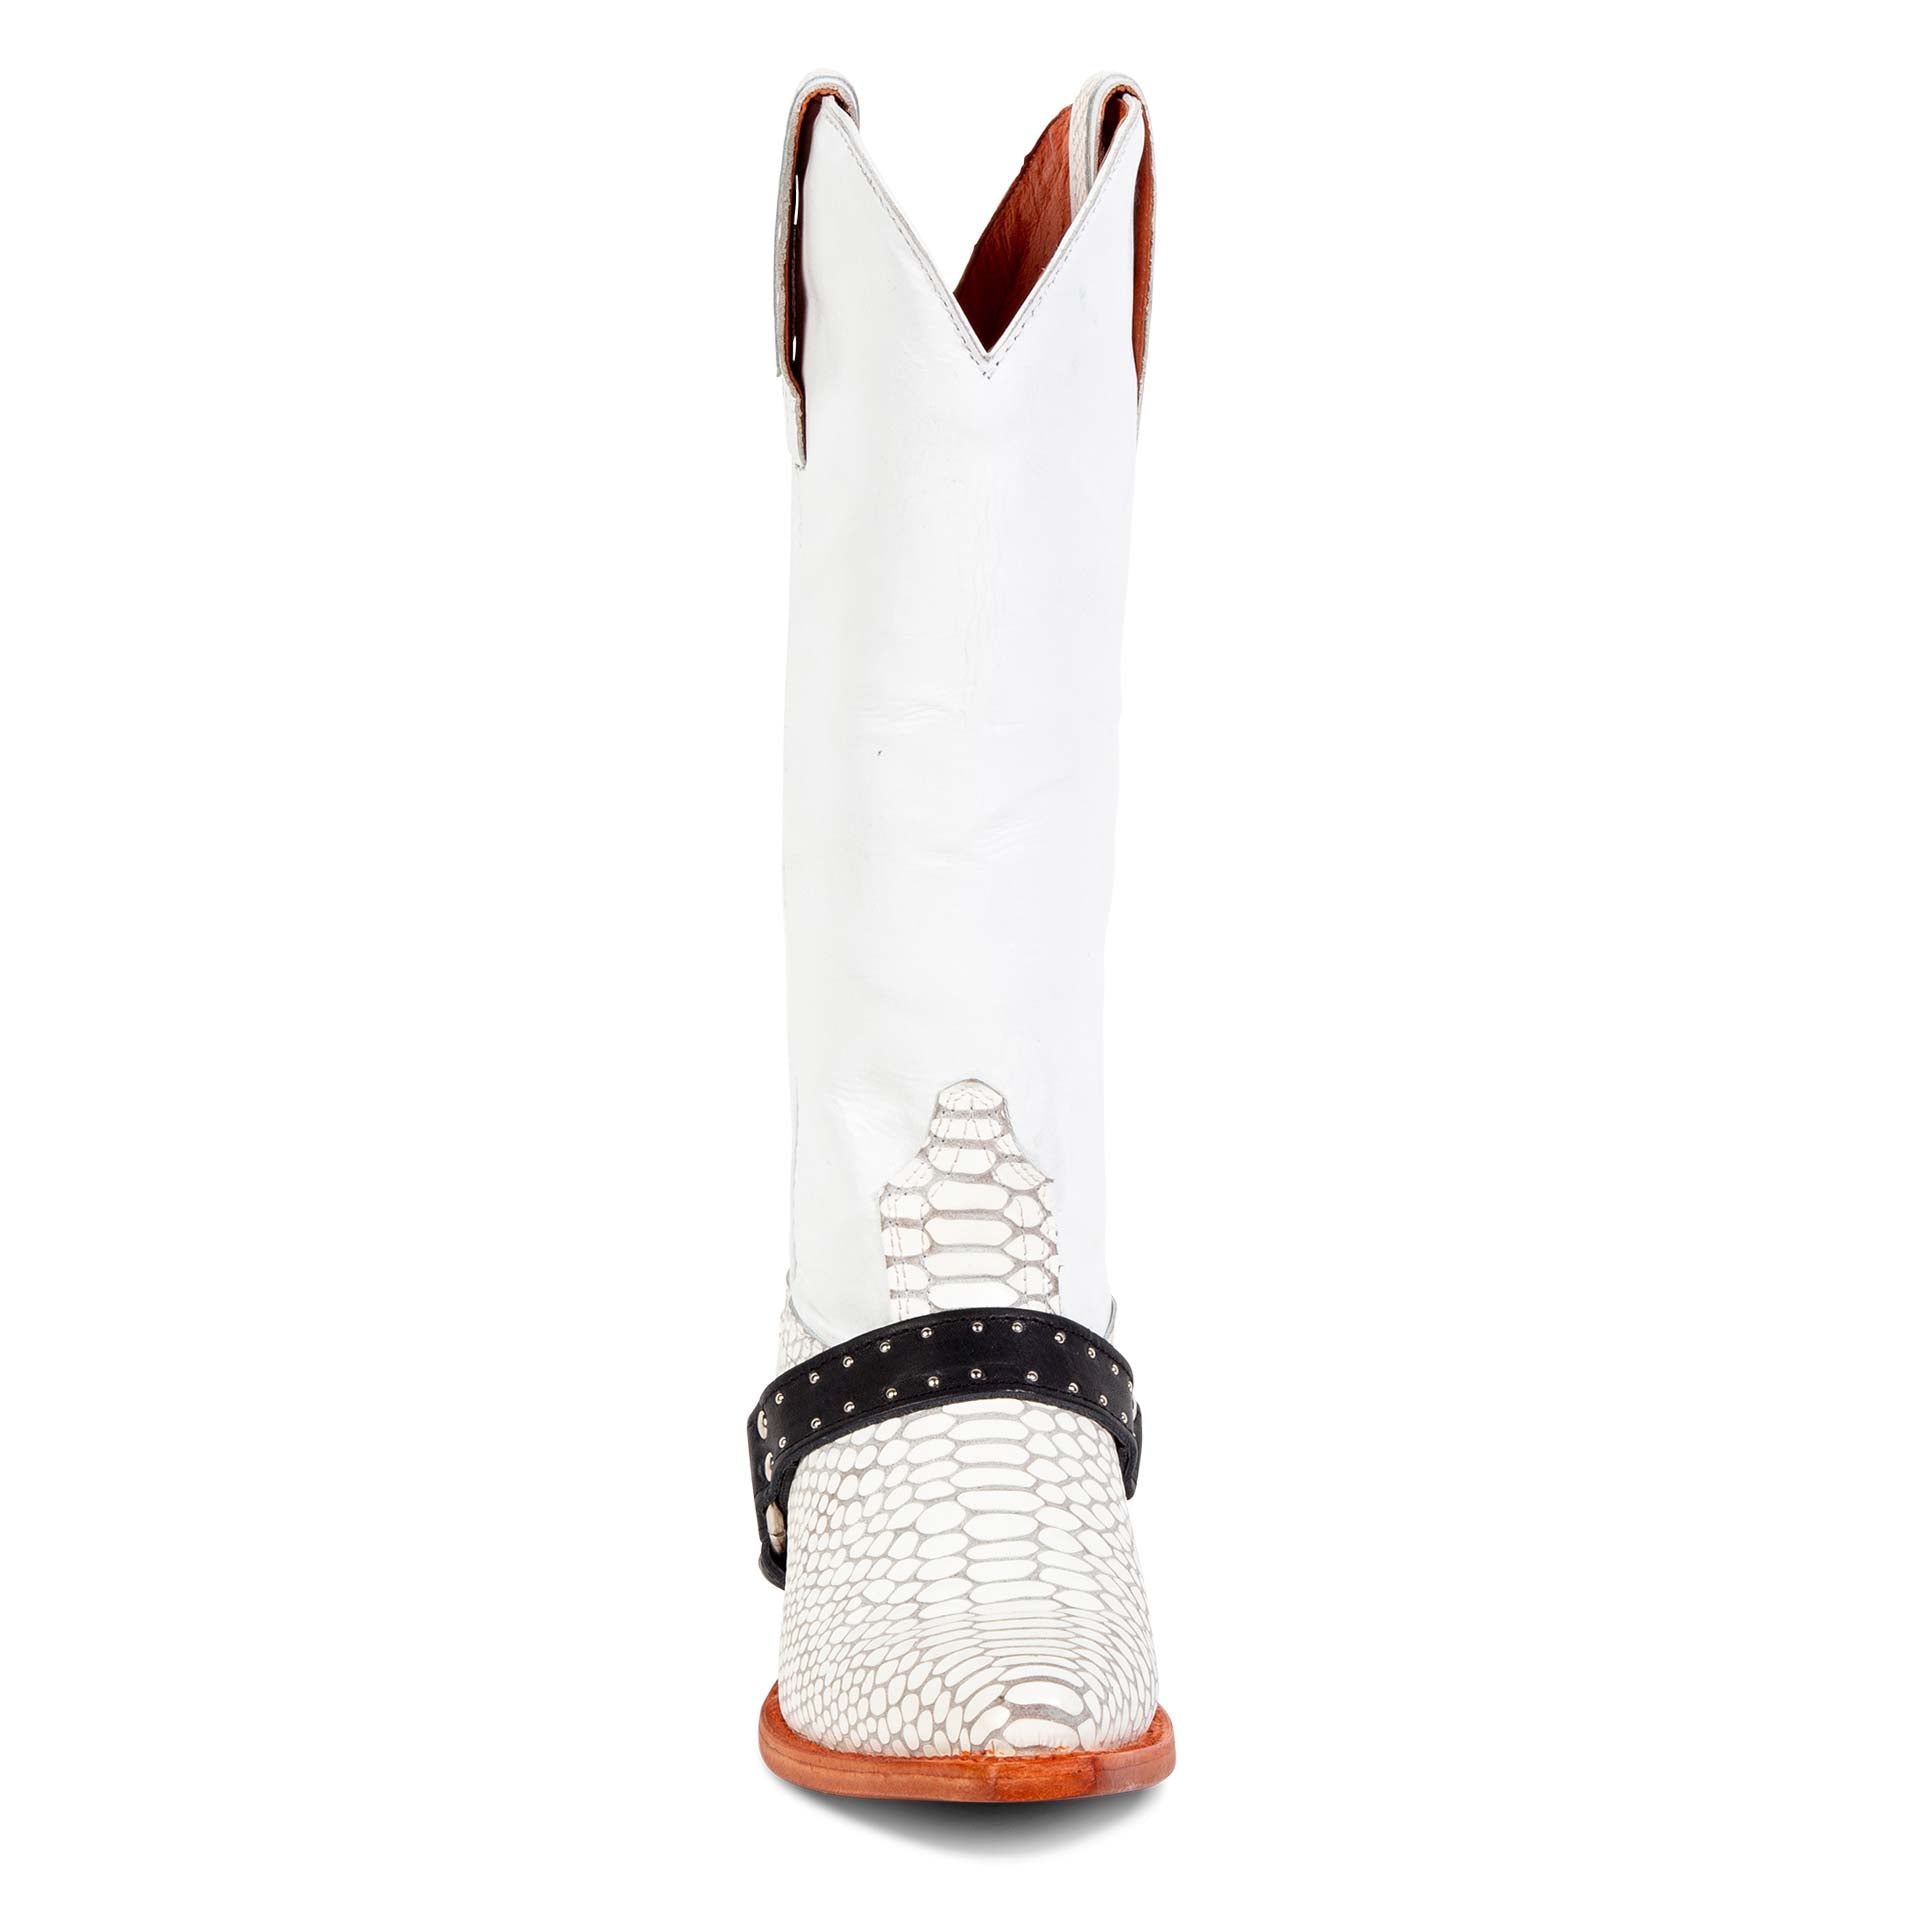 Front view showing scallop dip and leather harness with silver stud detailing on FREEBIRD women's Lusitano white snake boot